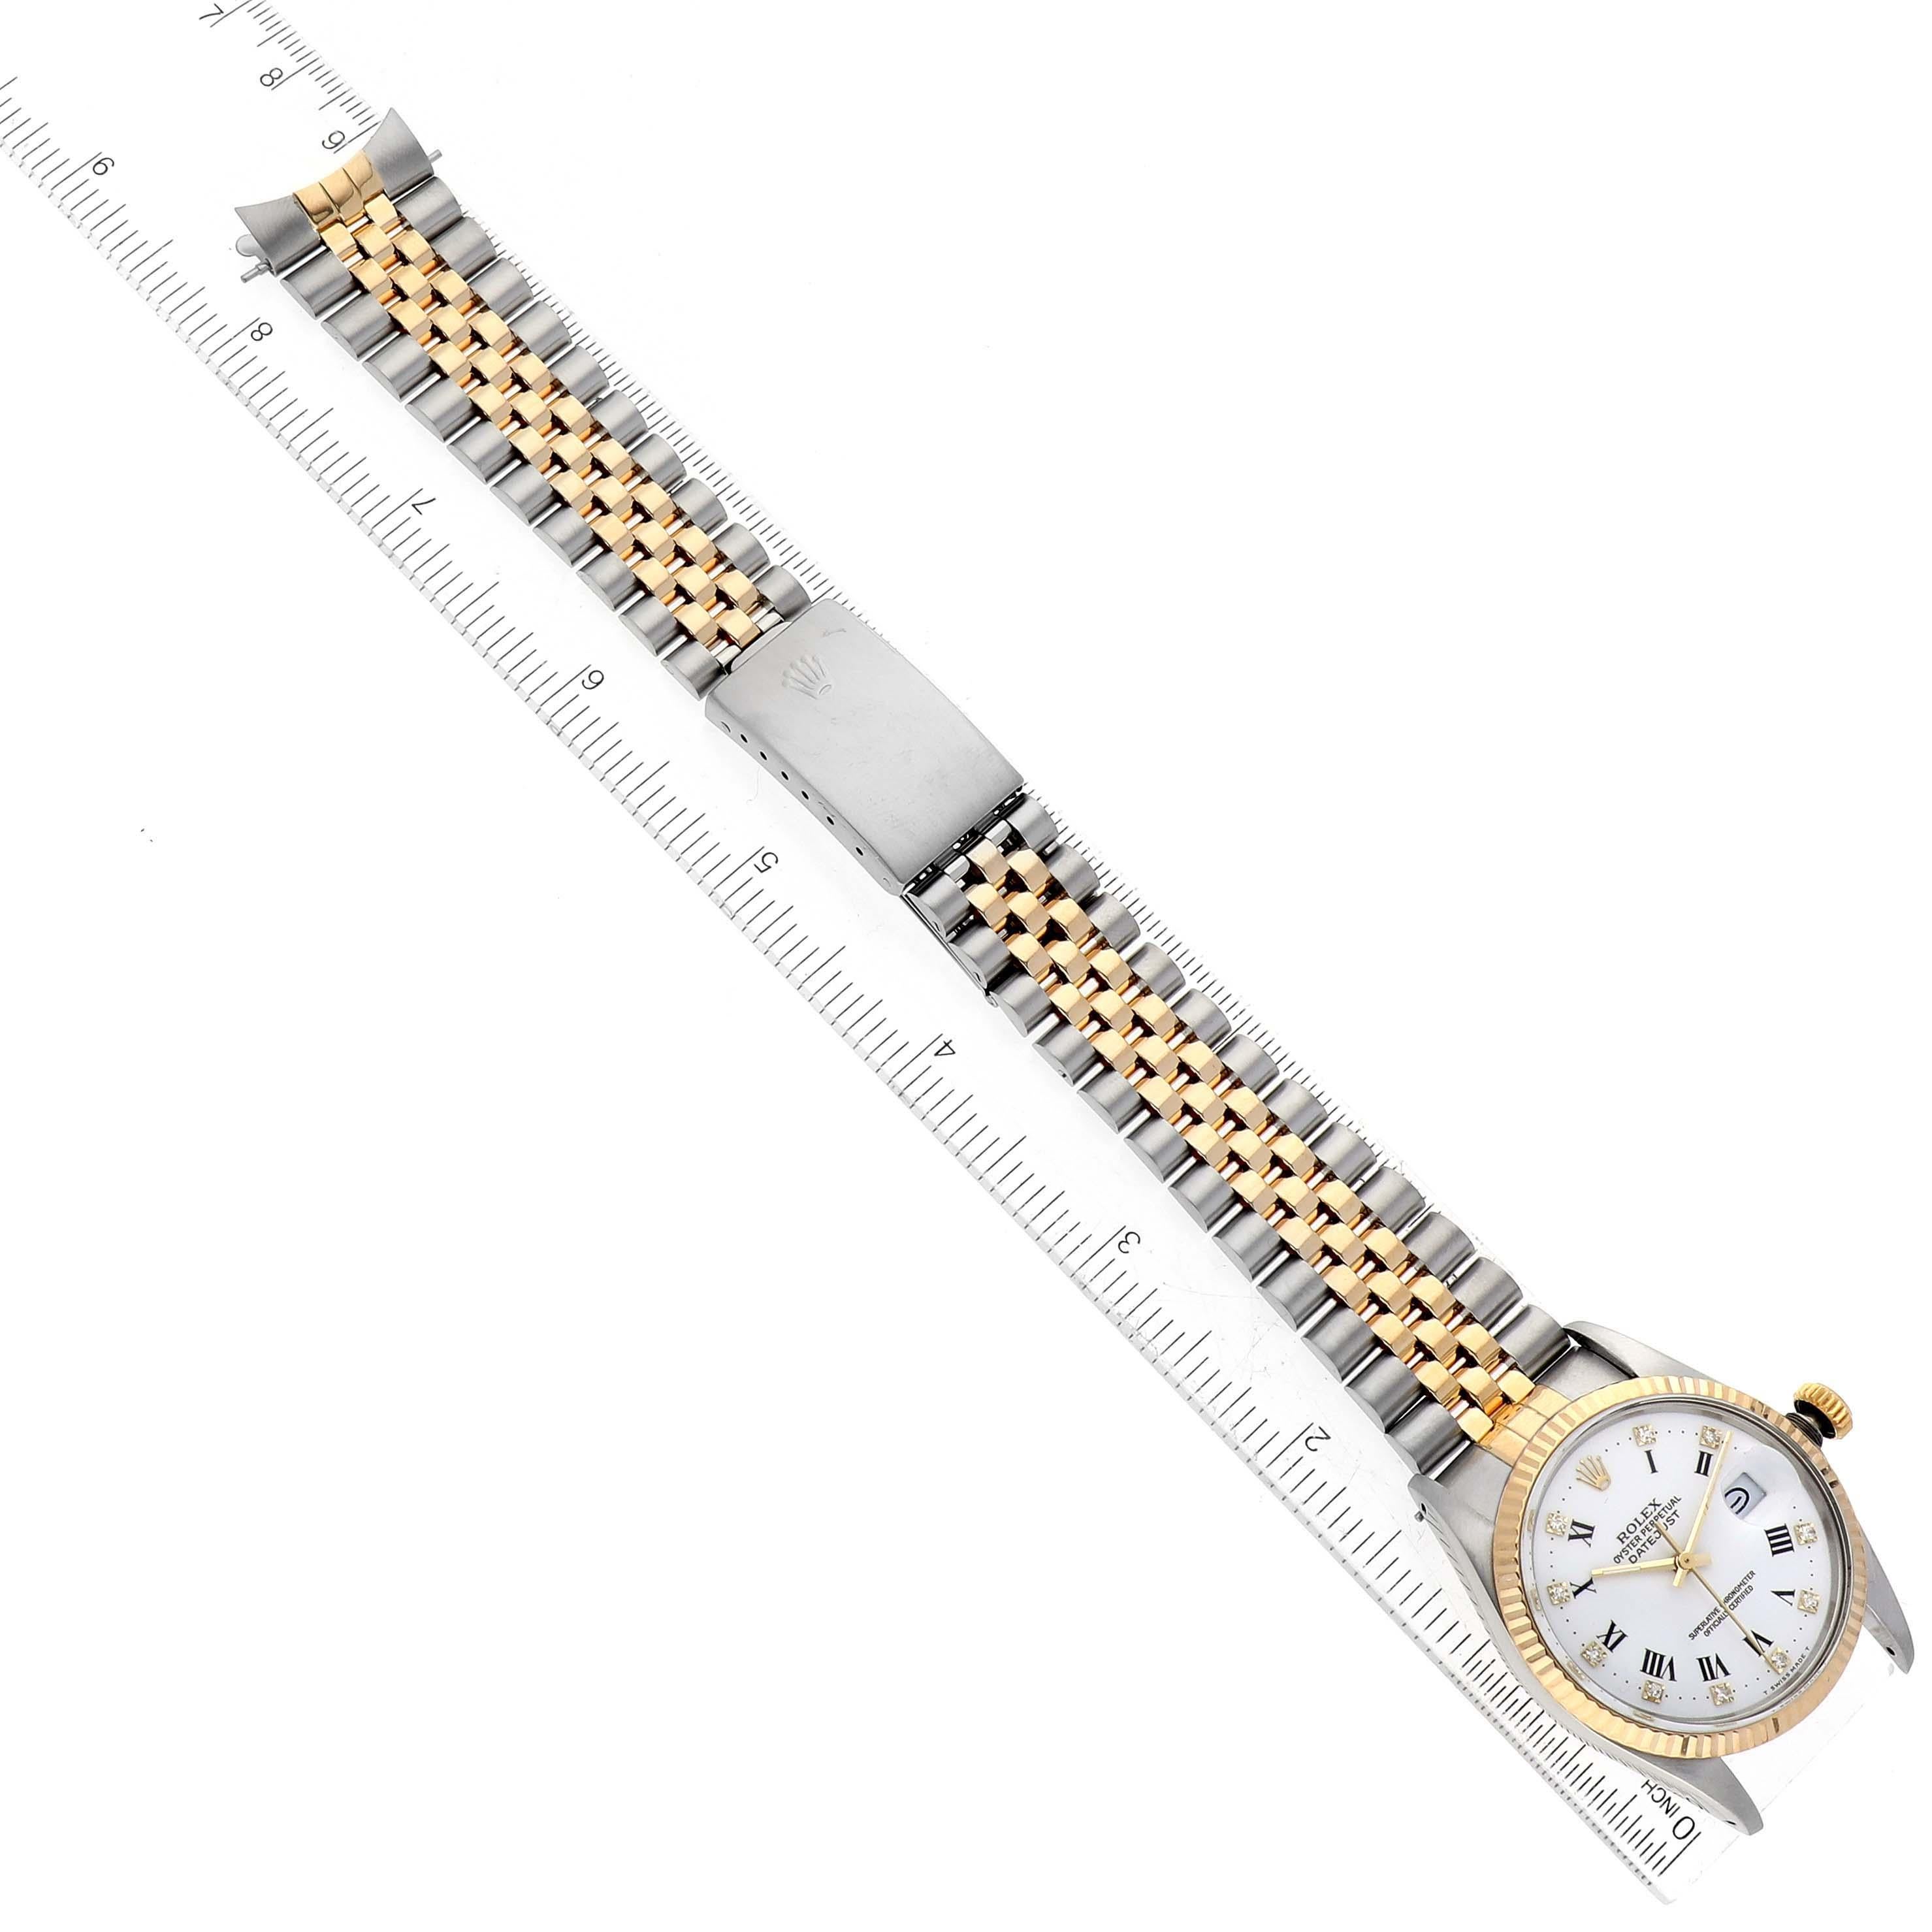 Rolex Datejust Steel Yellow Gold White Diamond Dial Vintage Mens Watch 16013 For Sale 6